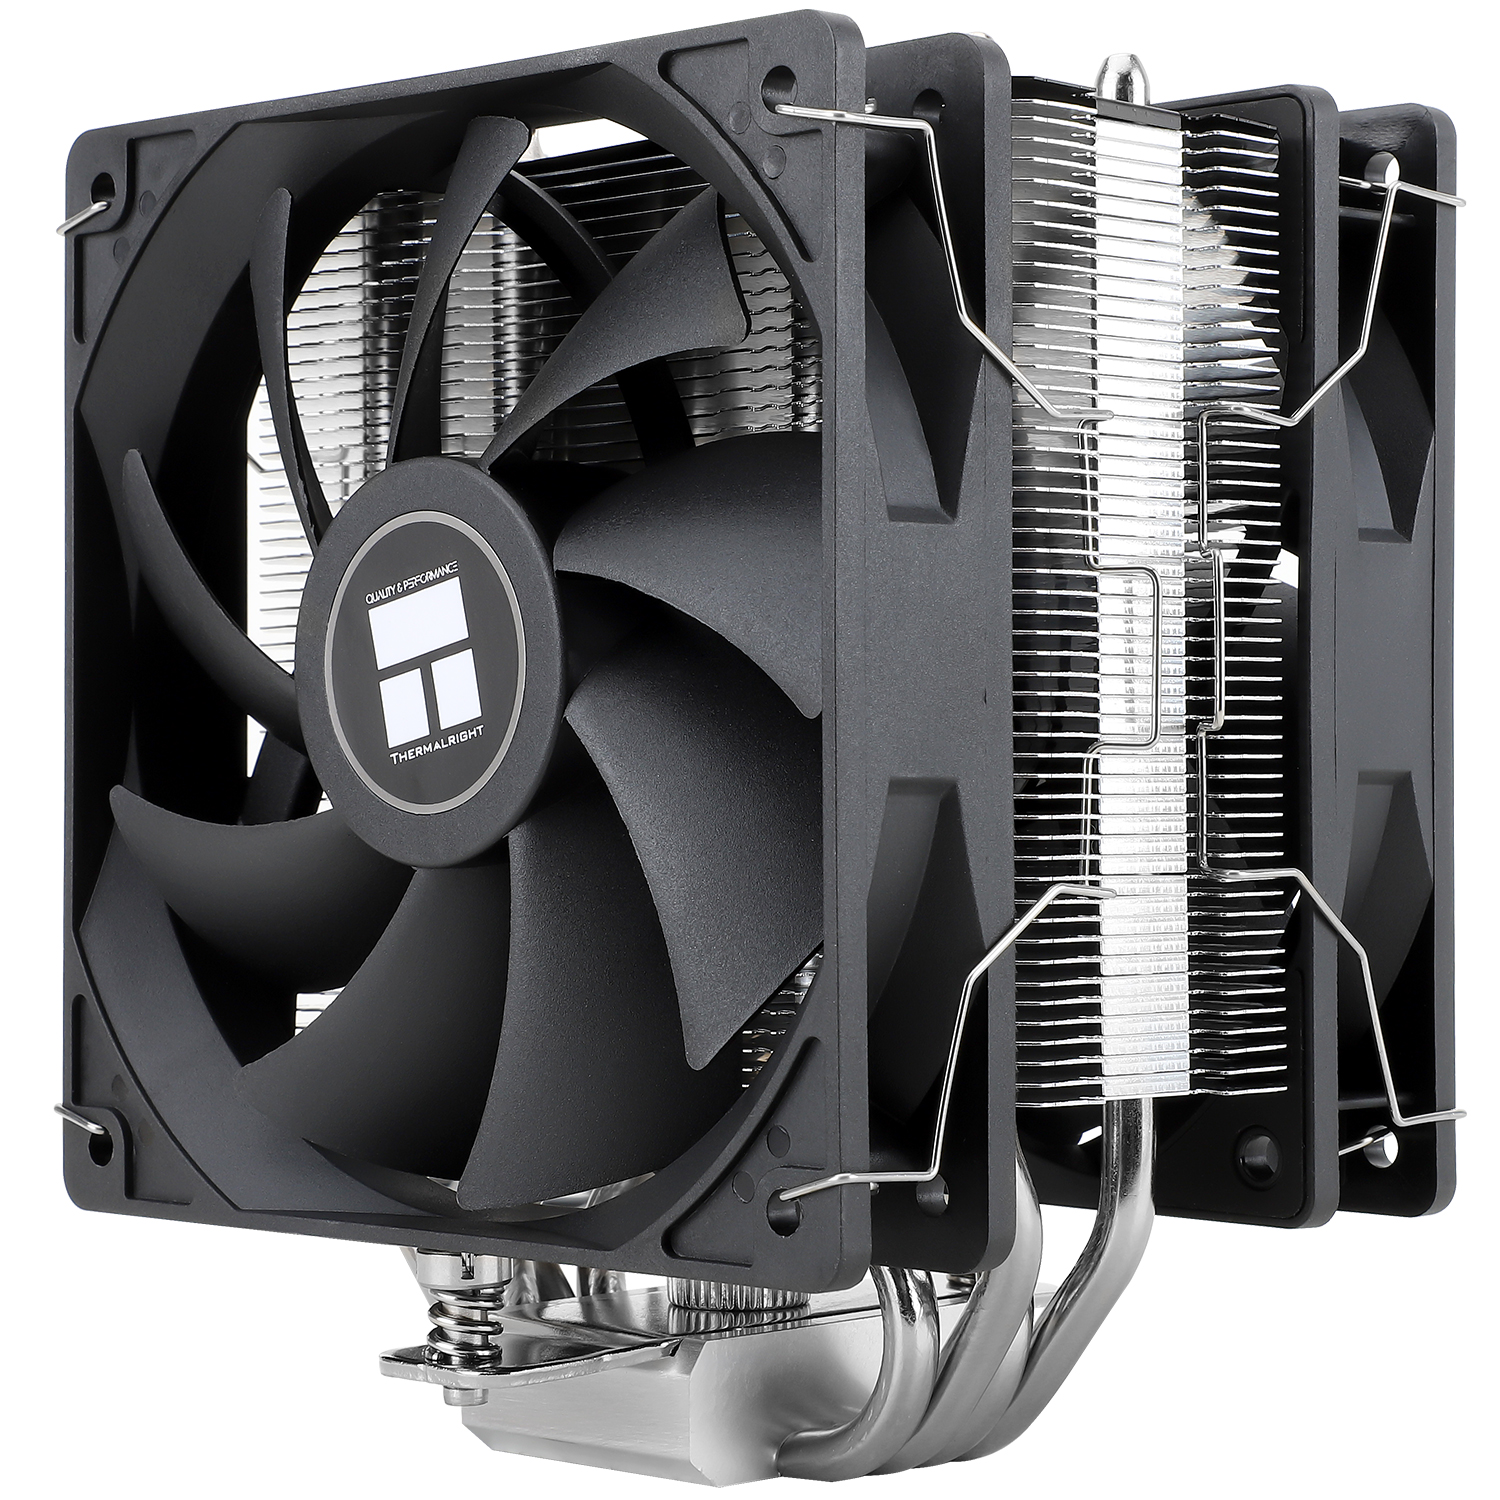 Thermalright Assassin X 120R SE CPU Air Cooler, AX120 4 heatpipes